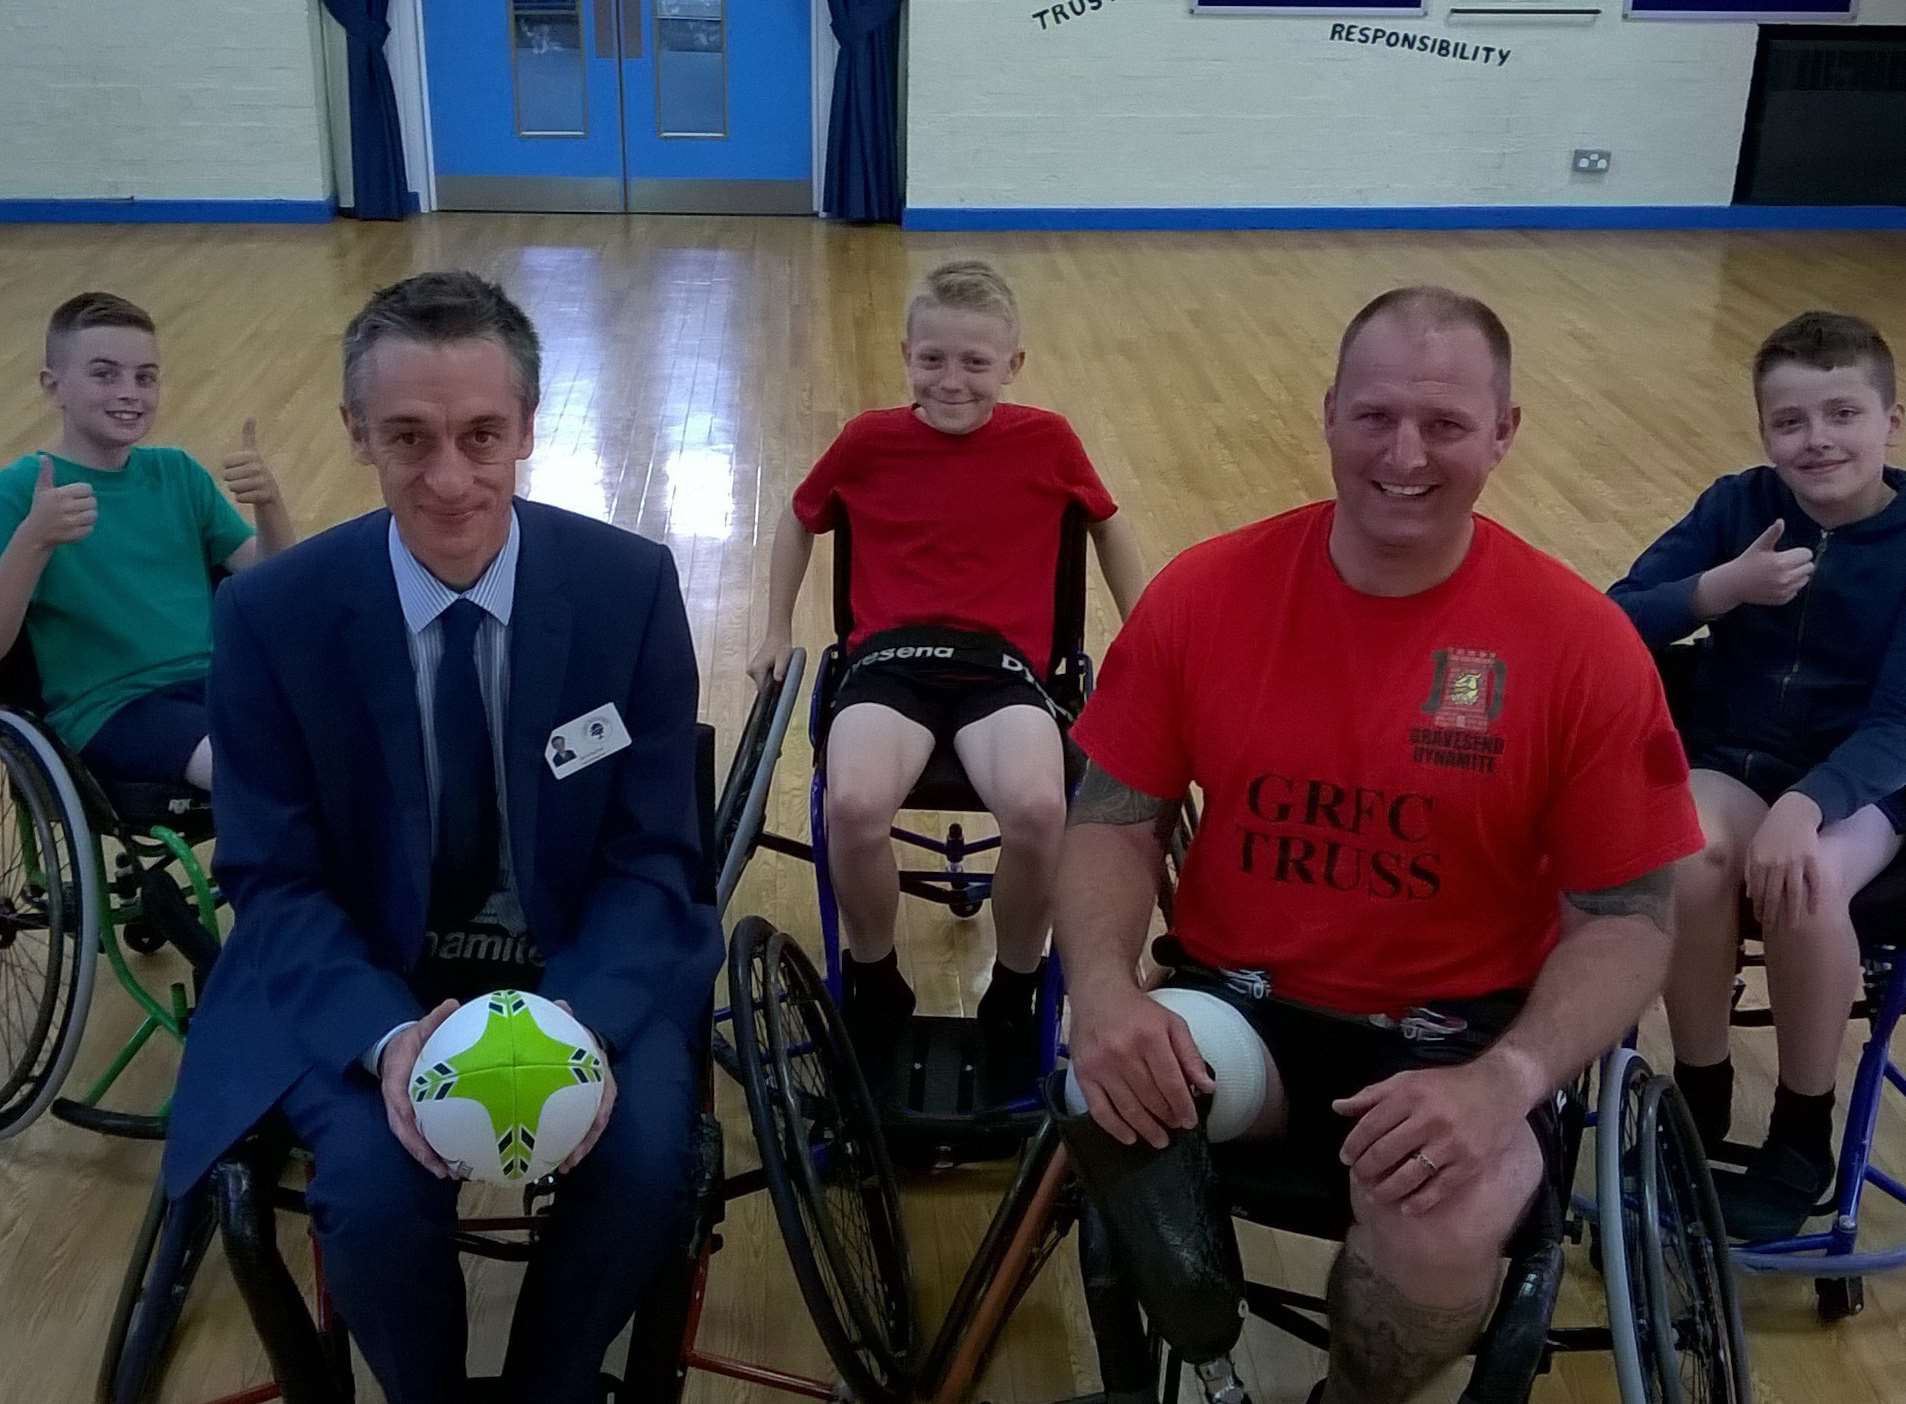 Wheelchair rugby team, Gravesend Dynamite, has started a schools programme offering the opportunity to pupils to try the sport.